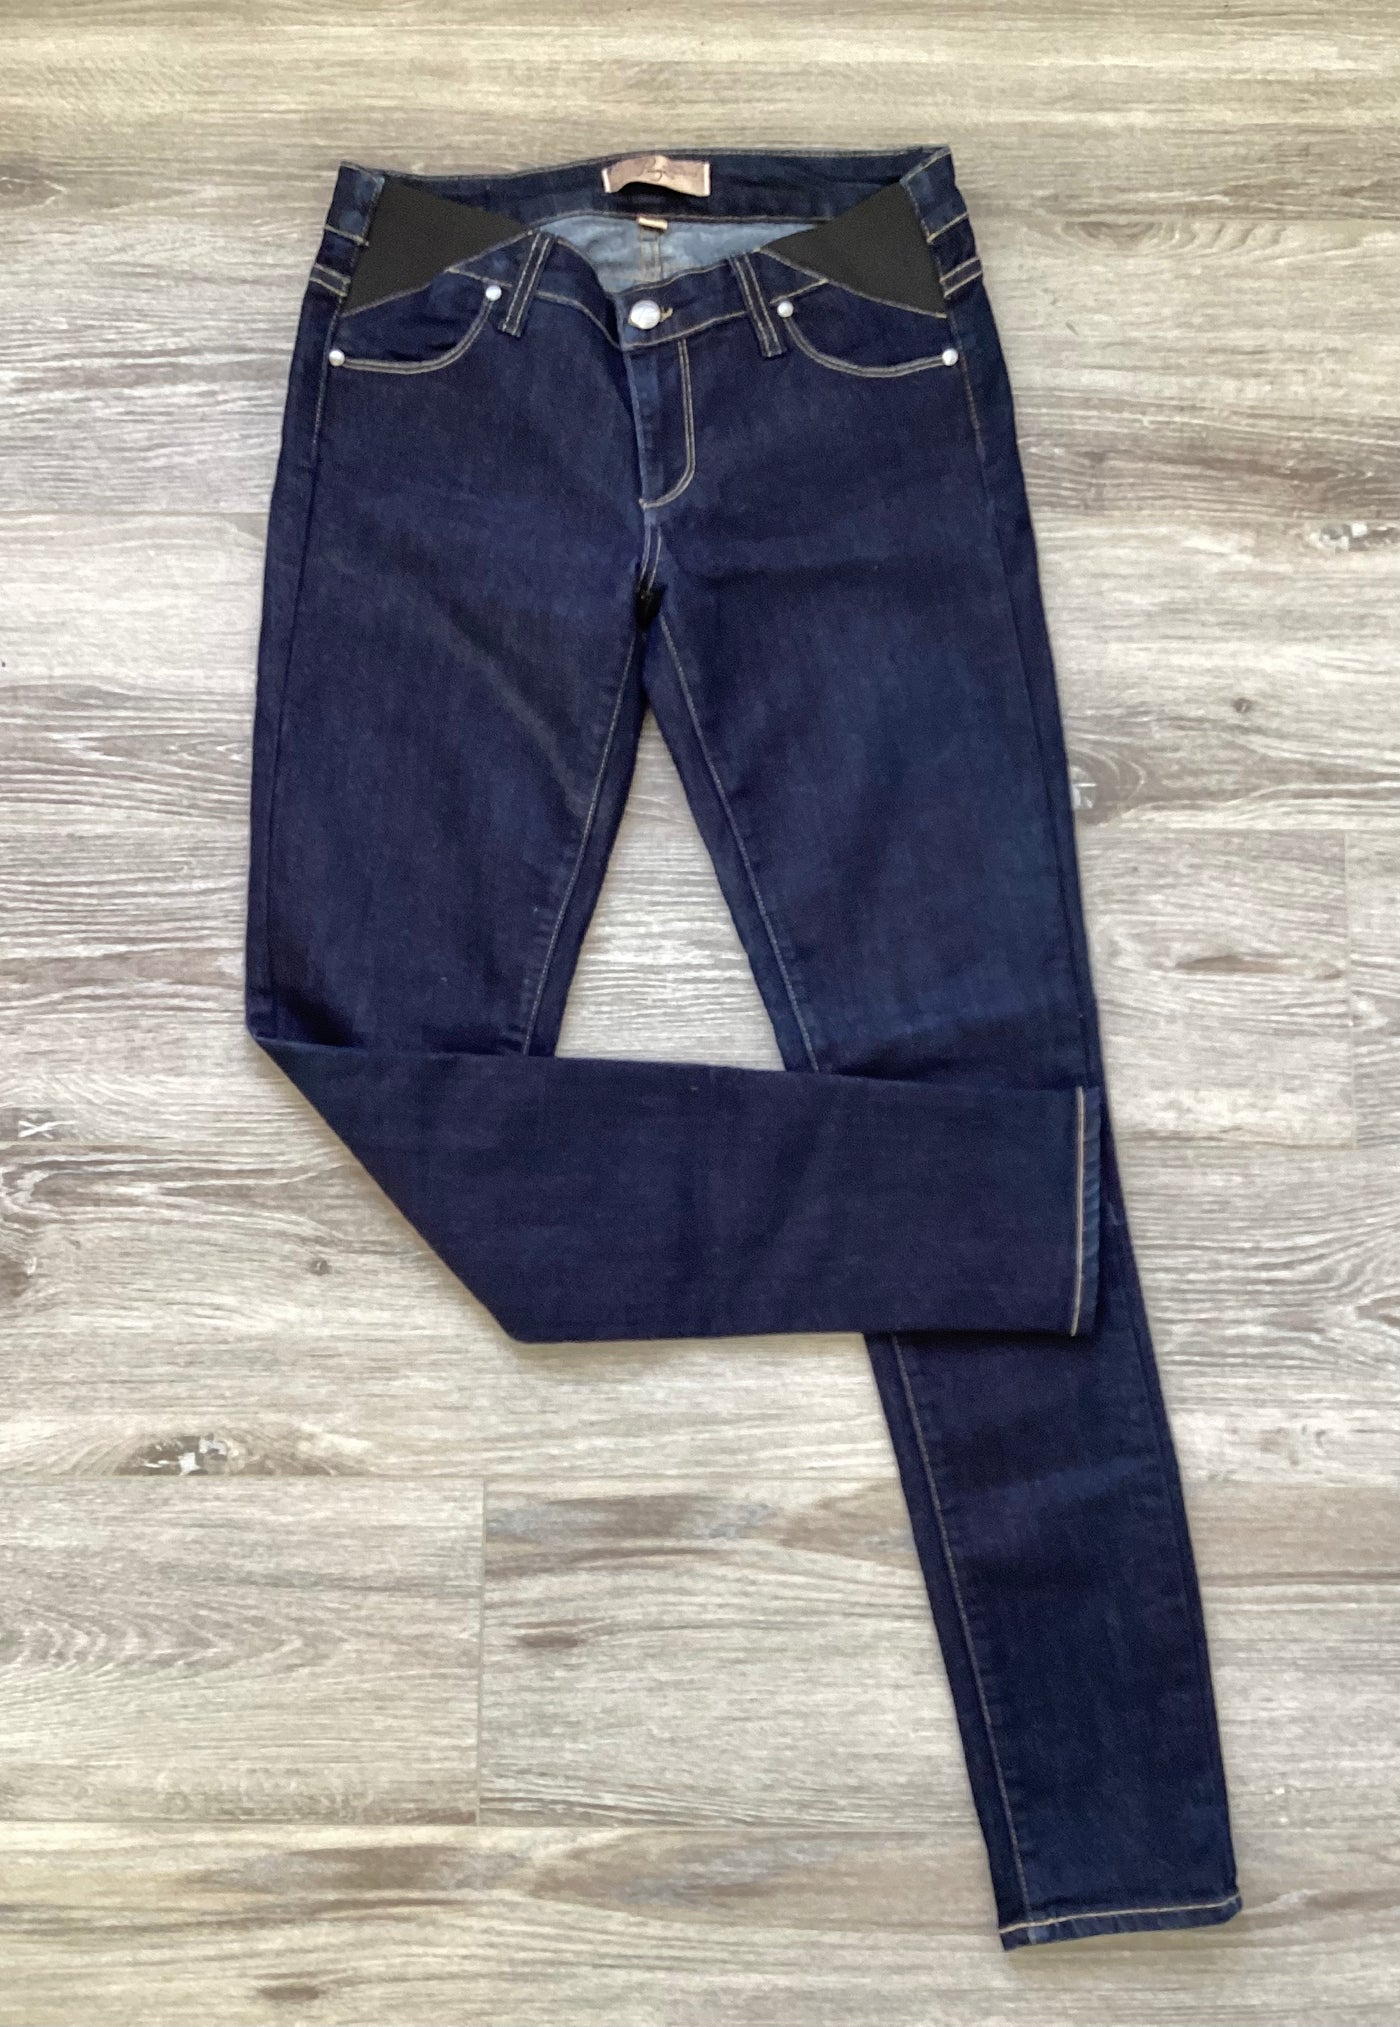 Paige Maternity Dark Blue Jeans - Size 27 (Approx UK 8)